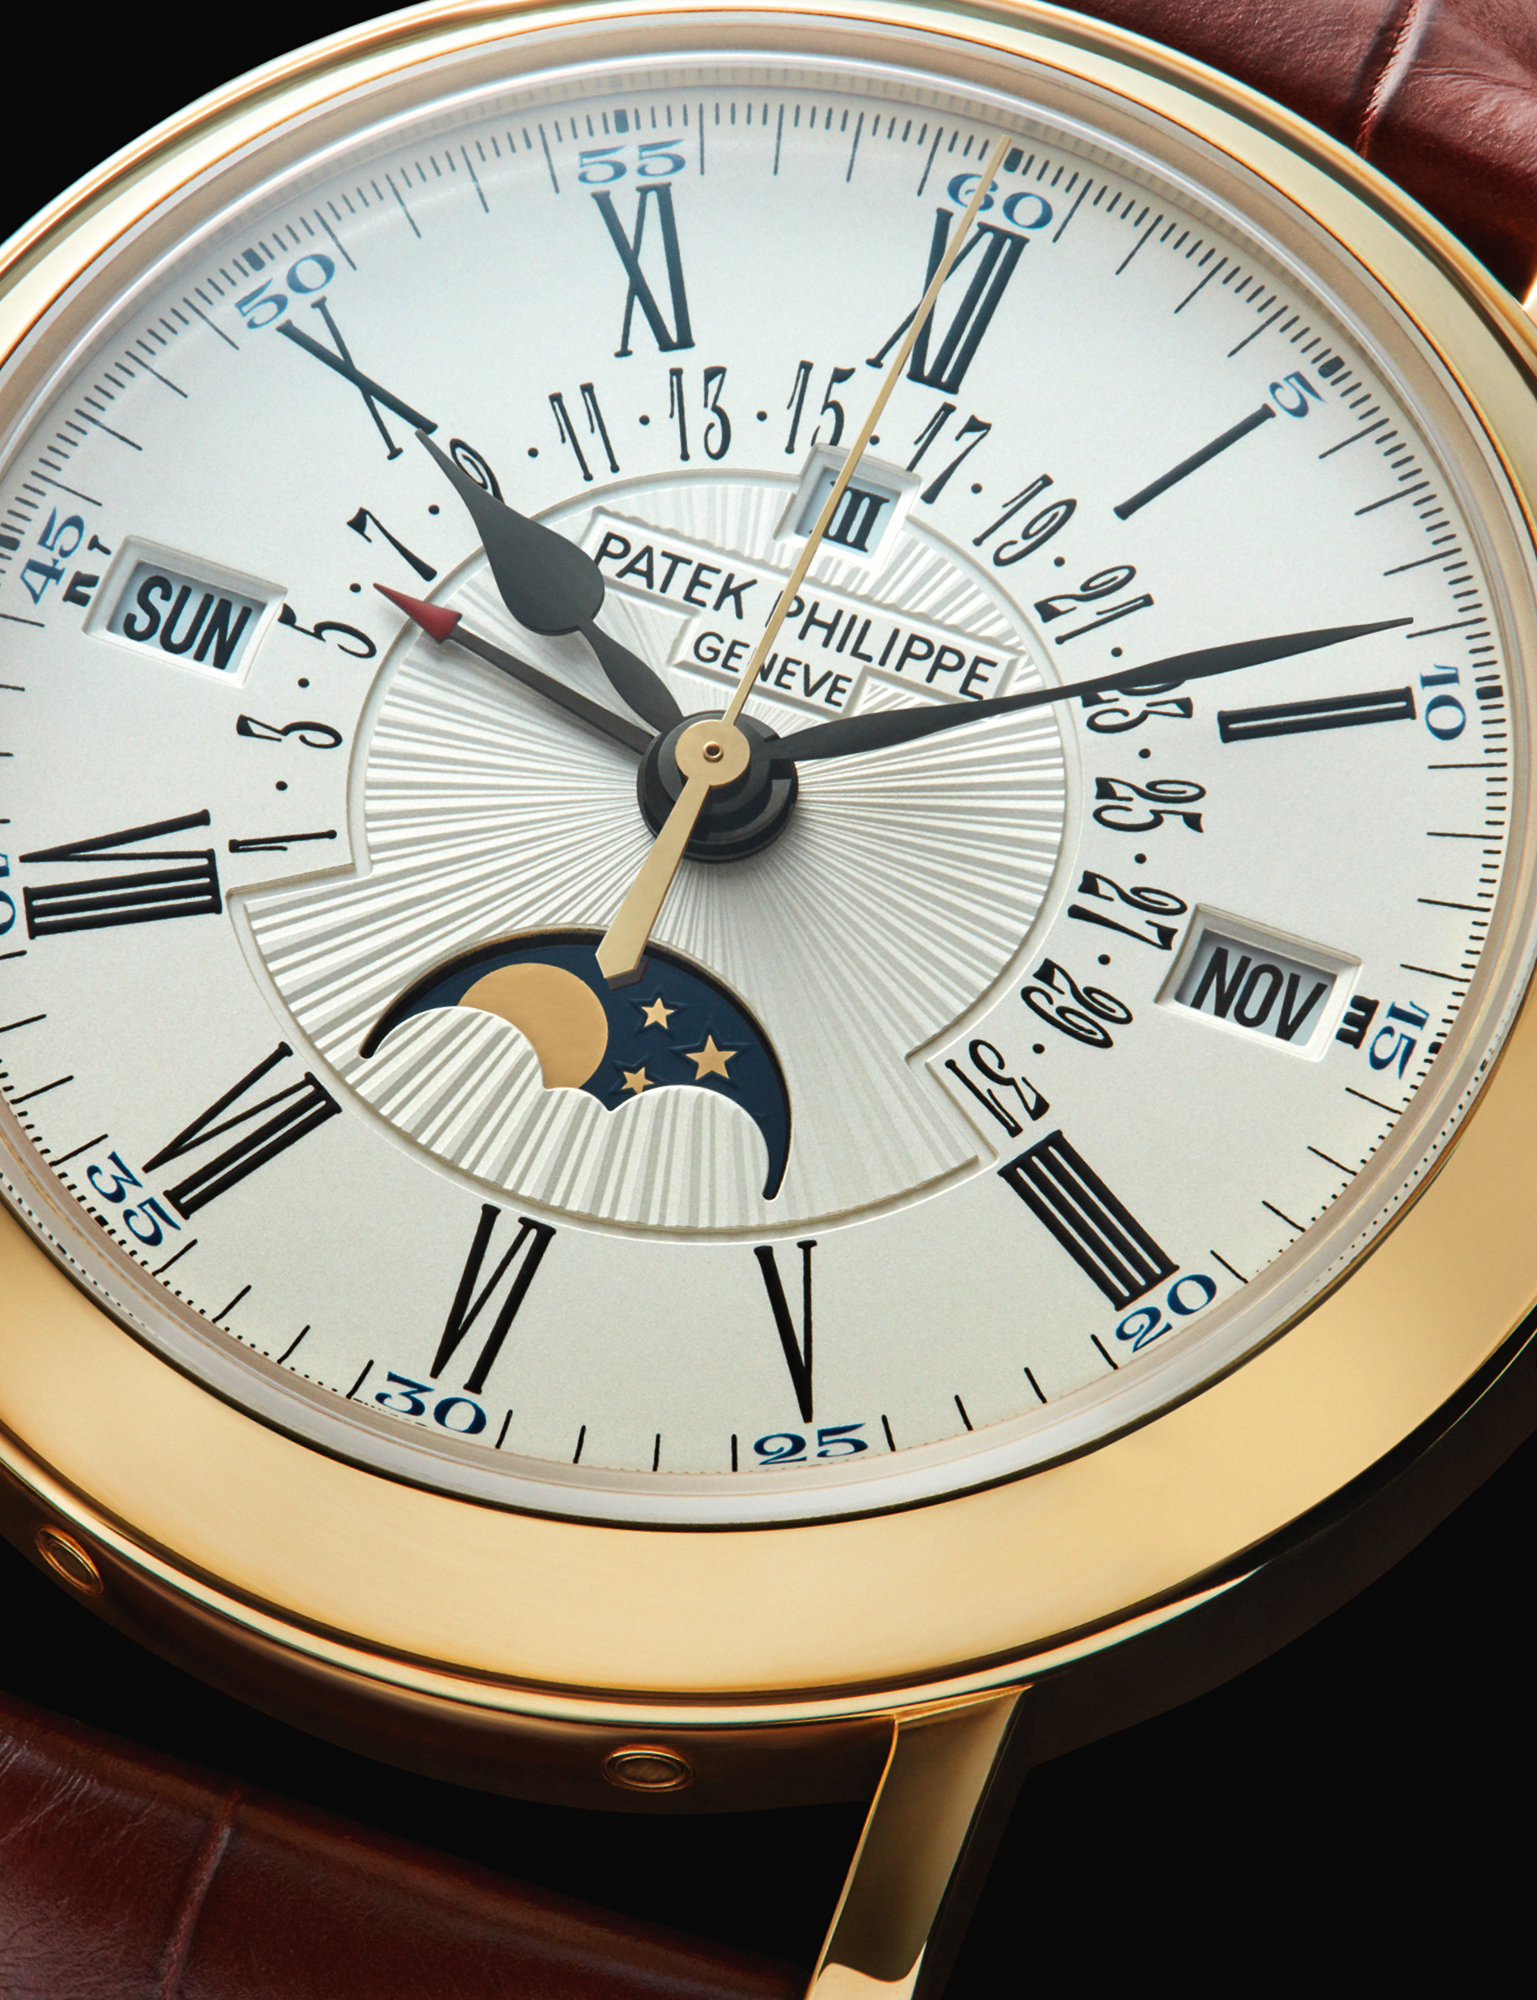 Able to accommodate months with 31, 30 and 28 days, plus February 29 in leap years, Patek Philippe’s Mens Ref. 5159J-001 Perpetual Calendar features an opaline-white dial with hand-guilloched centre. £73,620, PATEK PHILIPPE